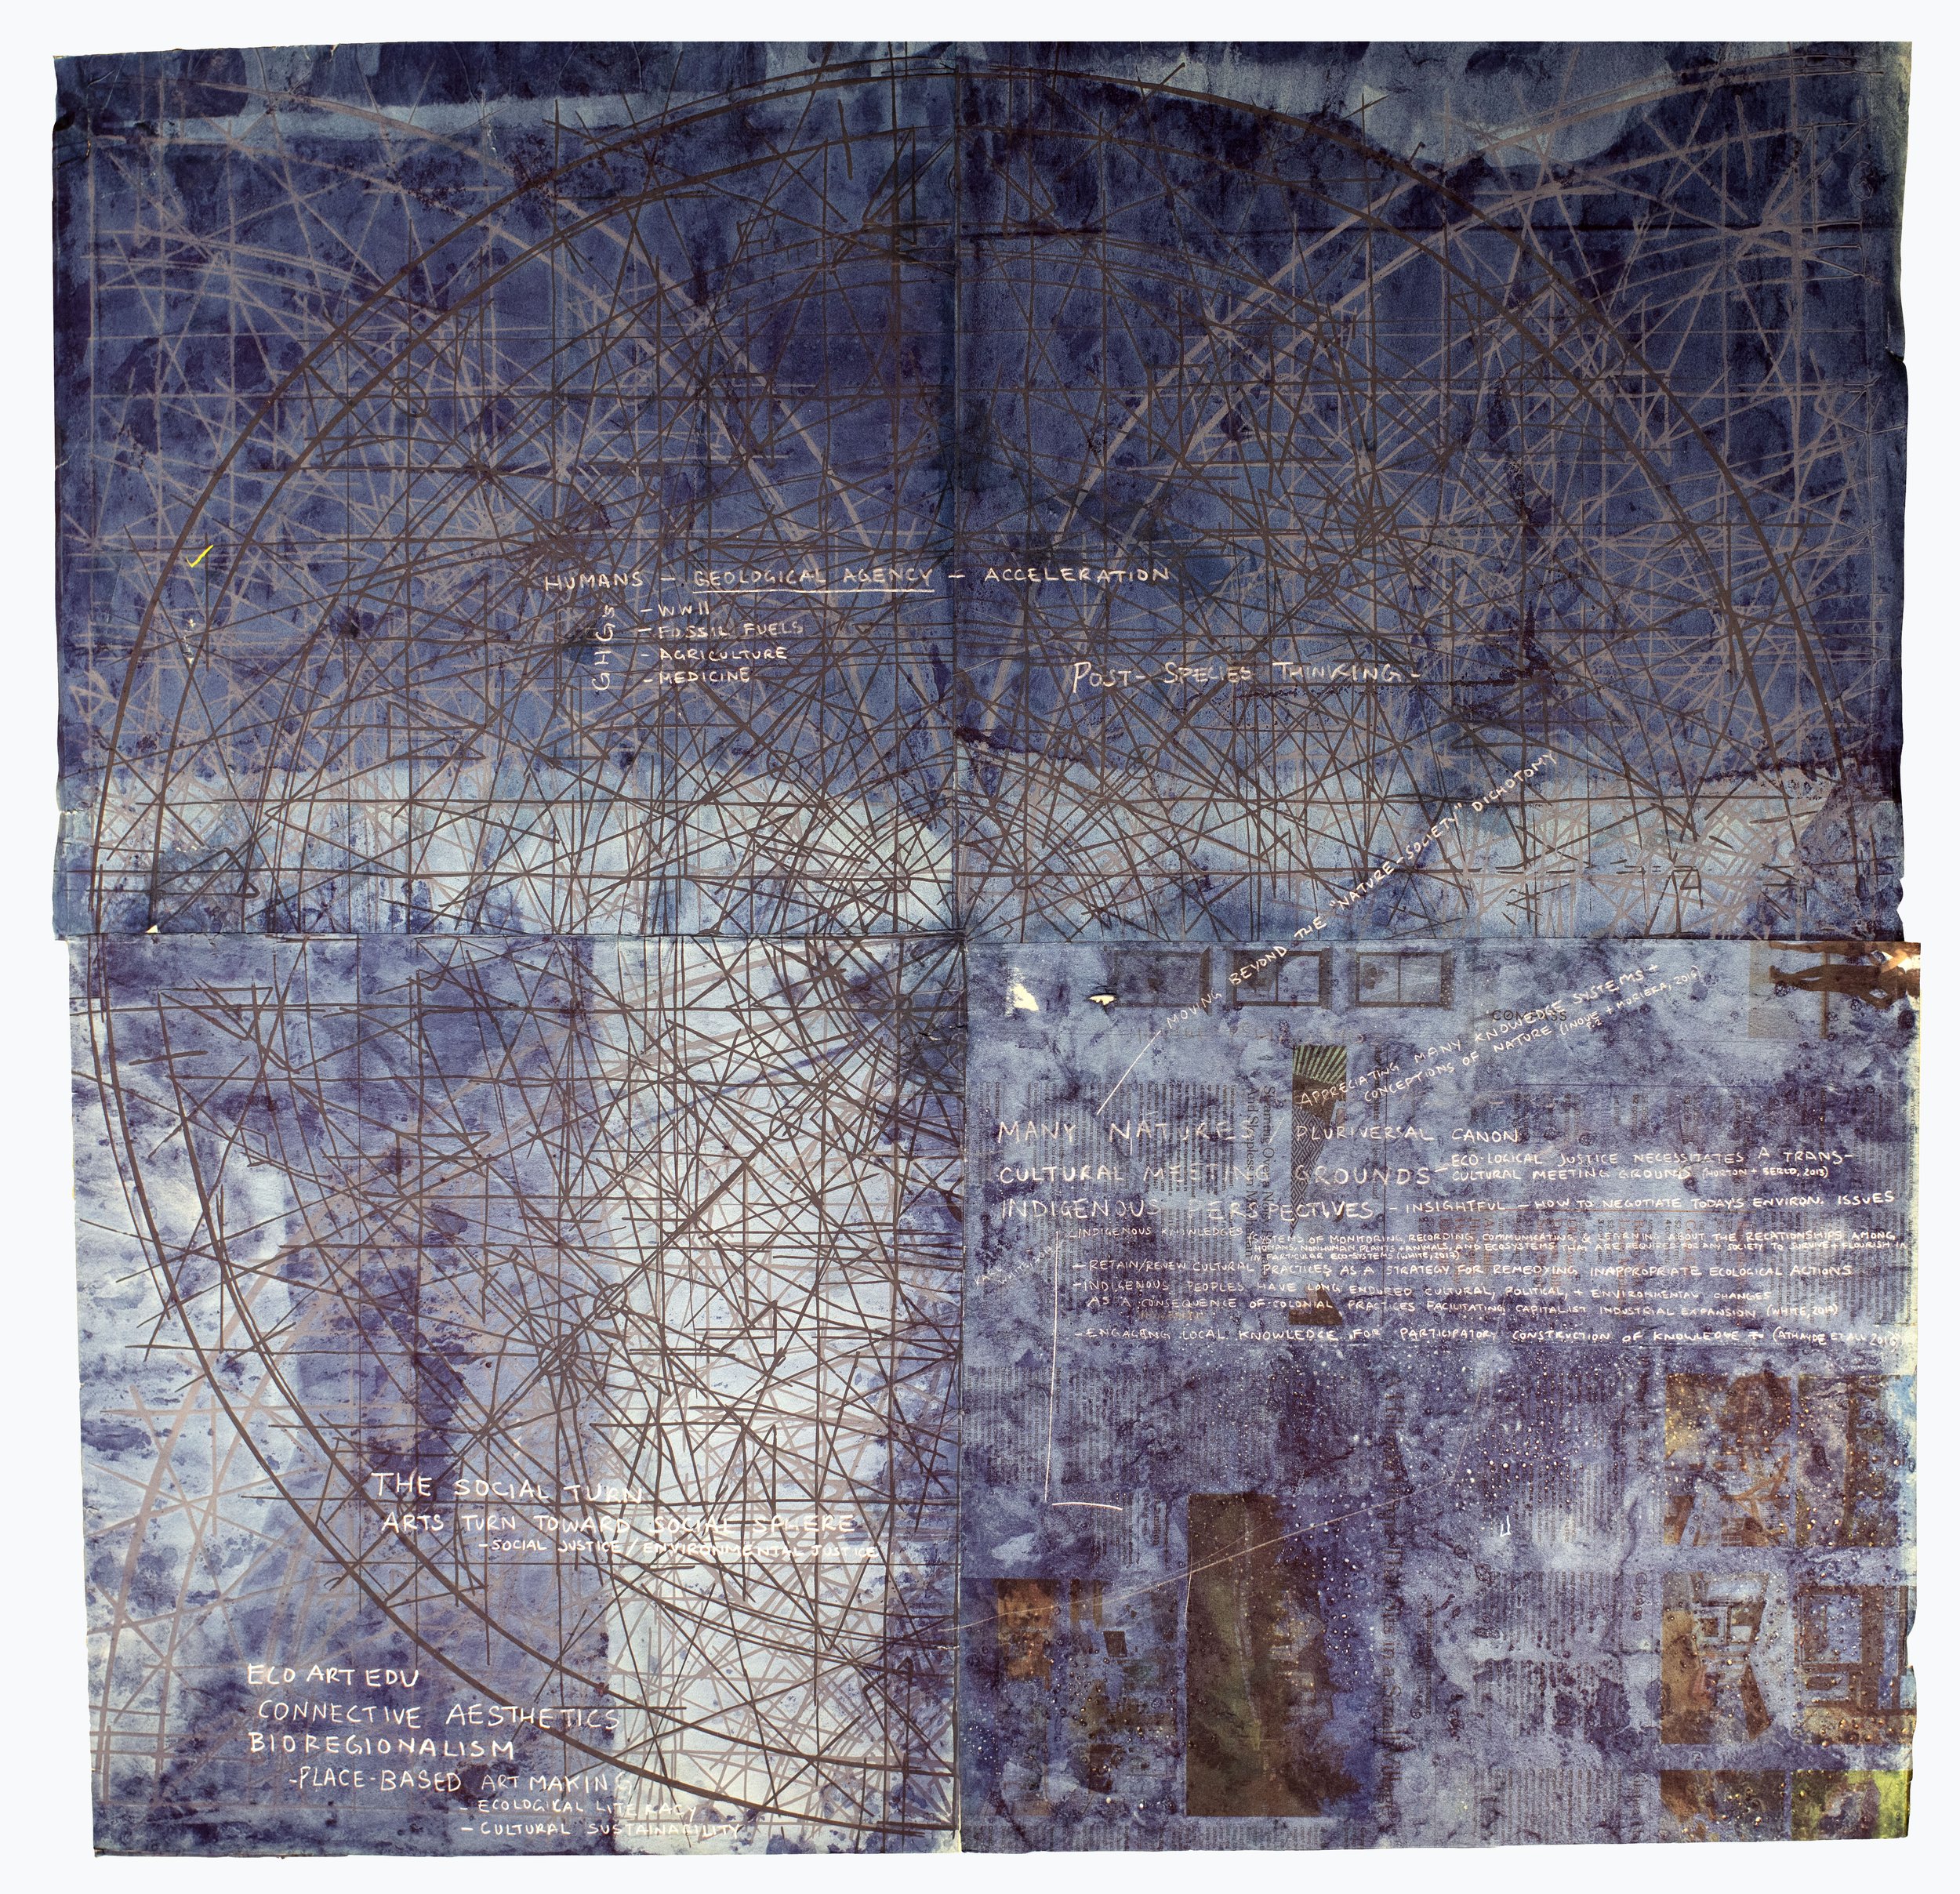  Mapping Hyperobects  3 ft x 3 ft  Mixed media on wooden panel  Screen print, colored pencil, and indigo dye on newspaper collaged to wooden panel   